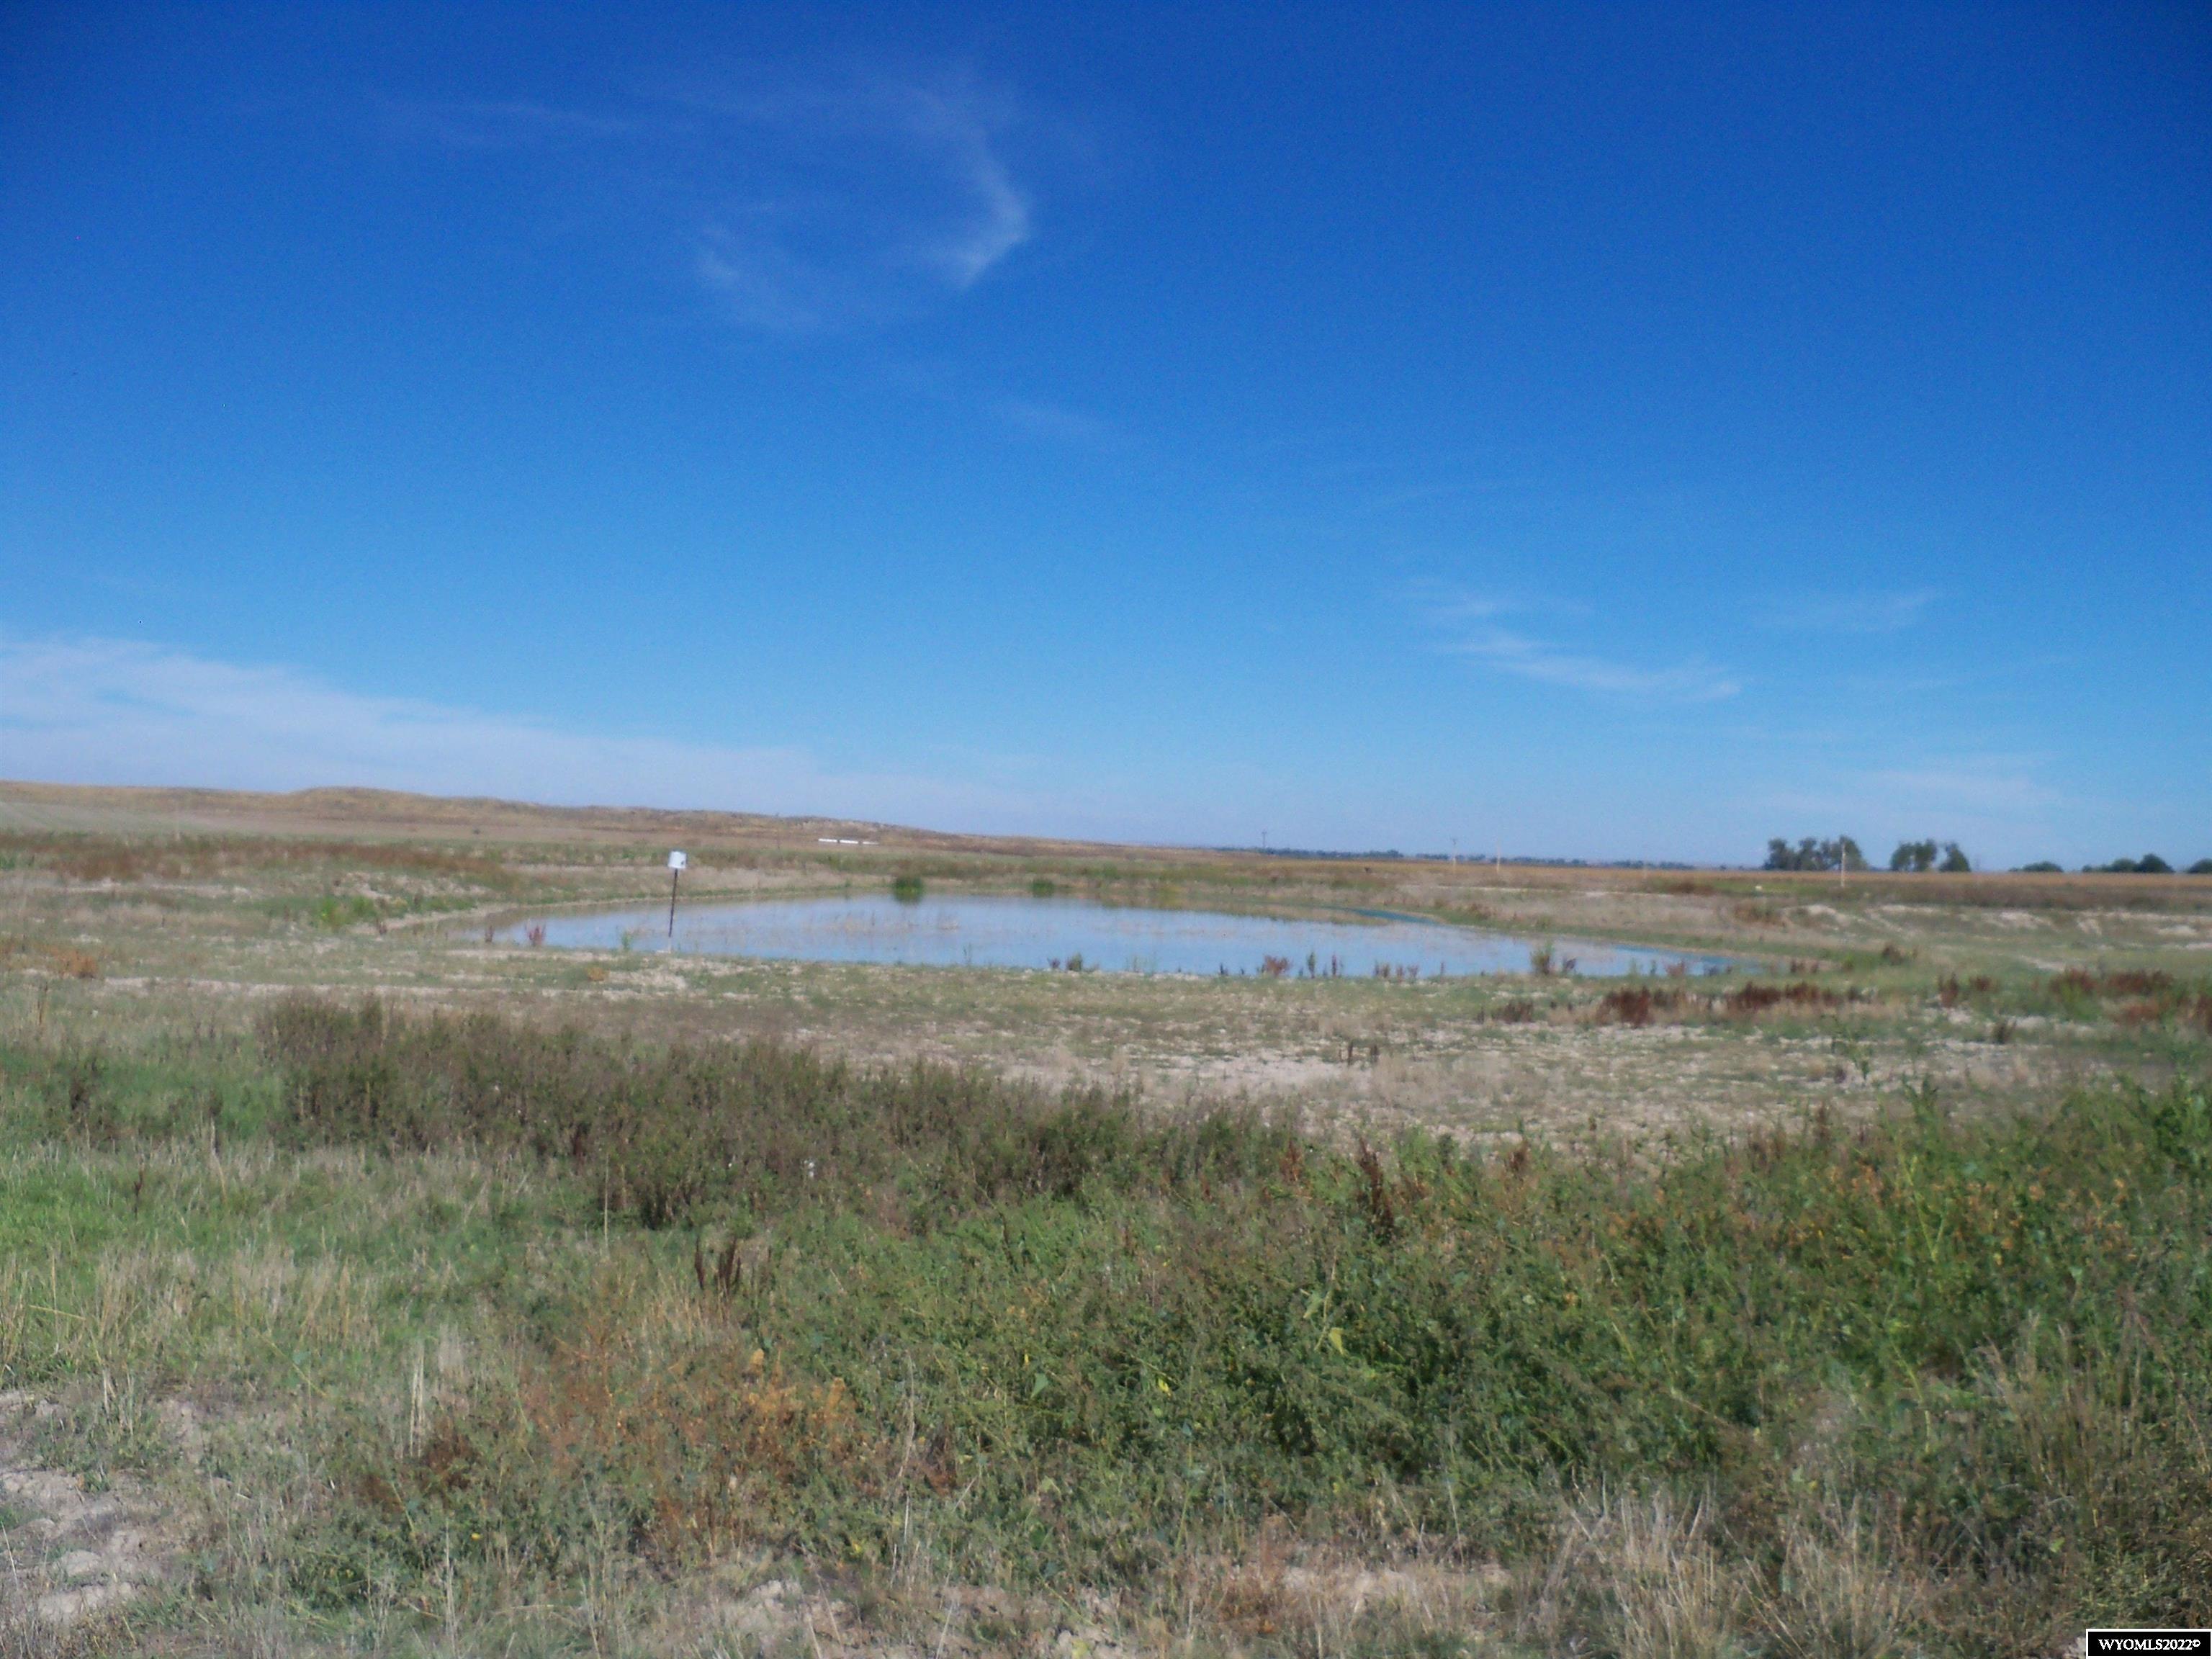 Great waterfowl and pheasant hunting on this property. Features a large fallible pond from the shared irrigation well. Would also make a great home site. Irrigated crop lands to produce abundant feed. Pond has an aerator for fish.